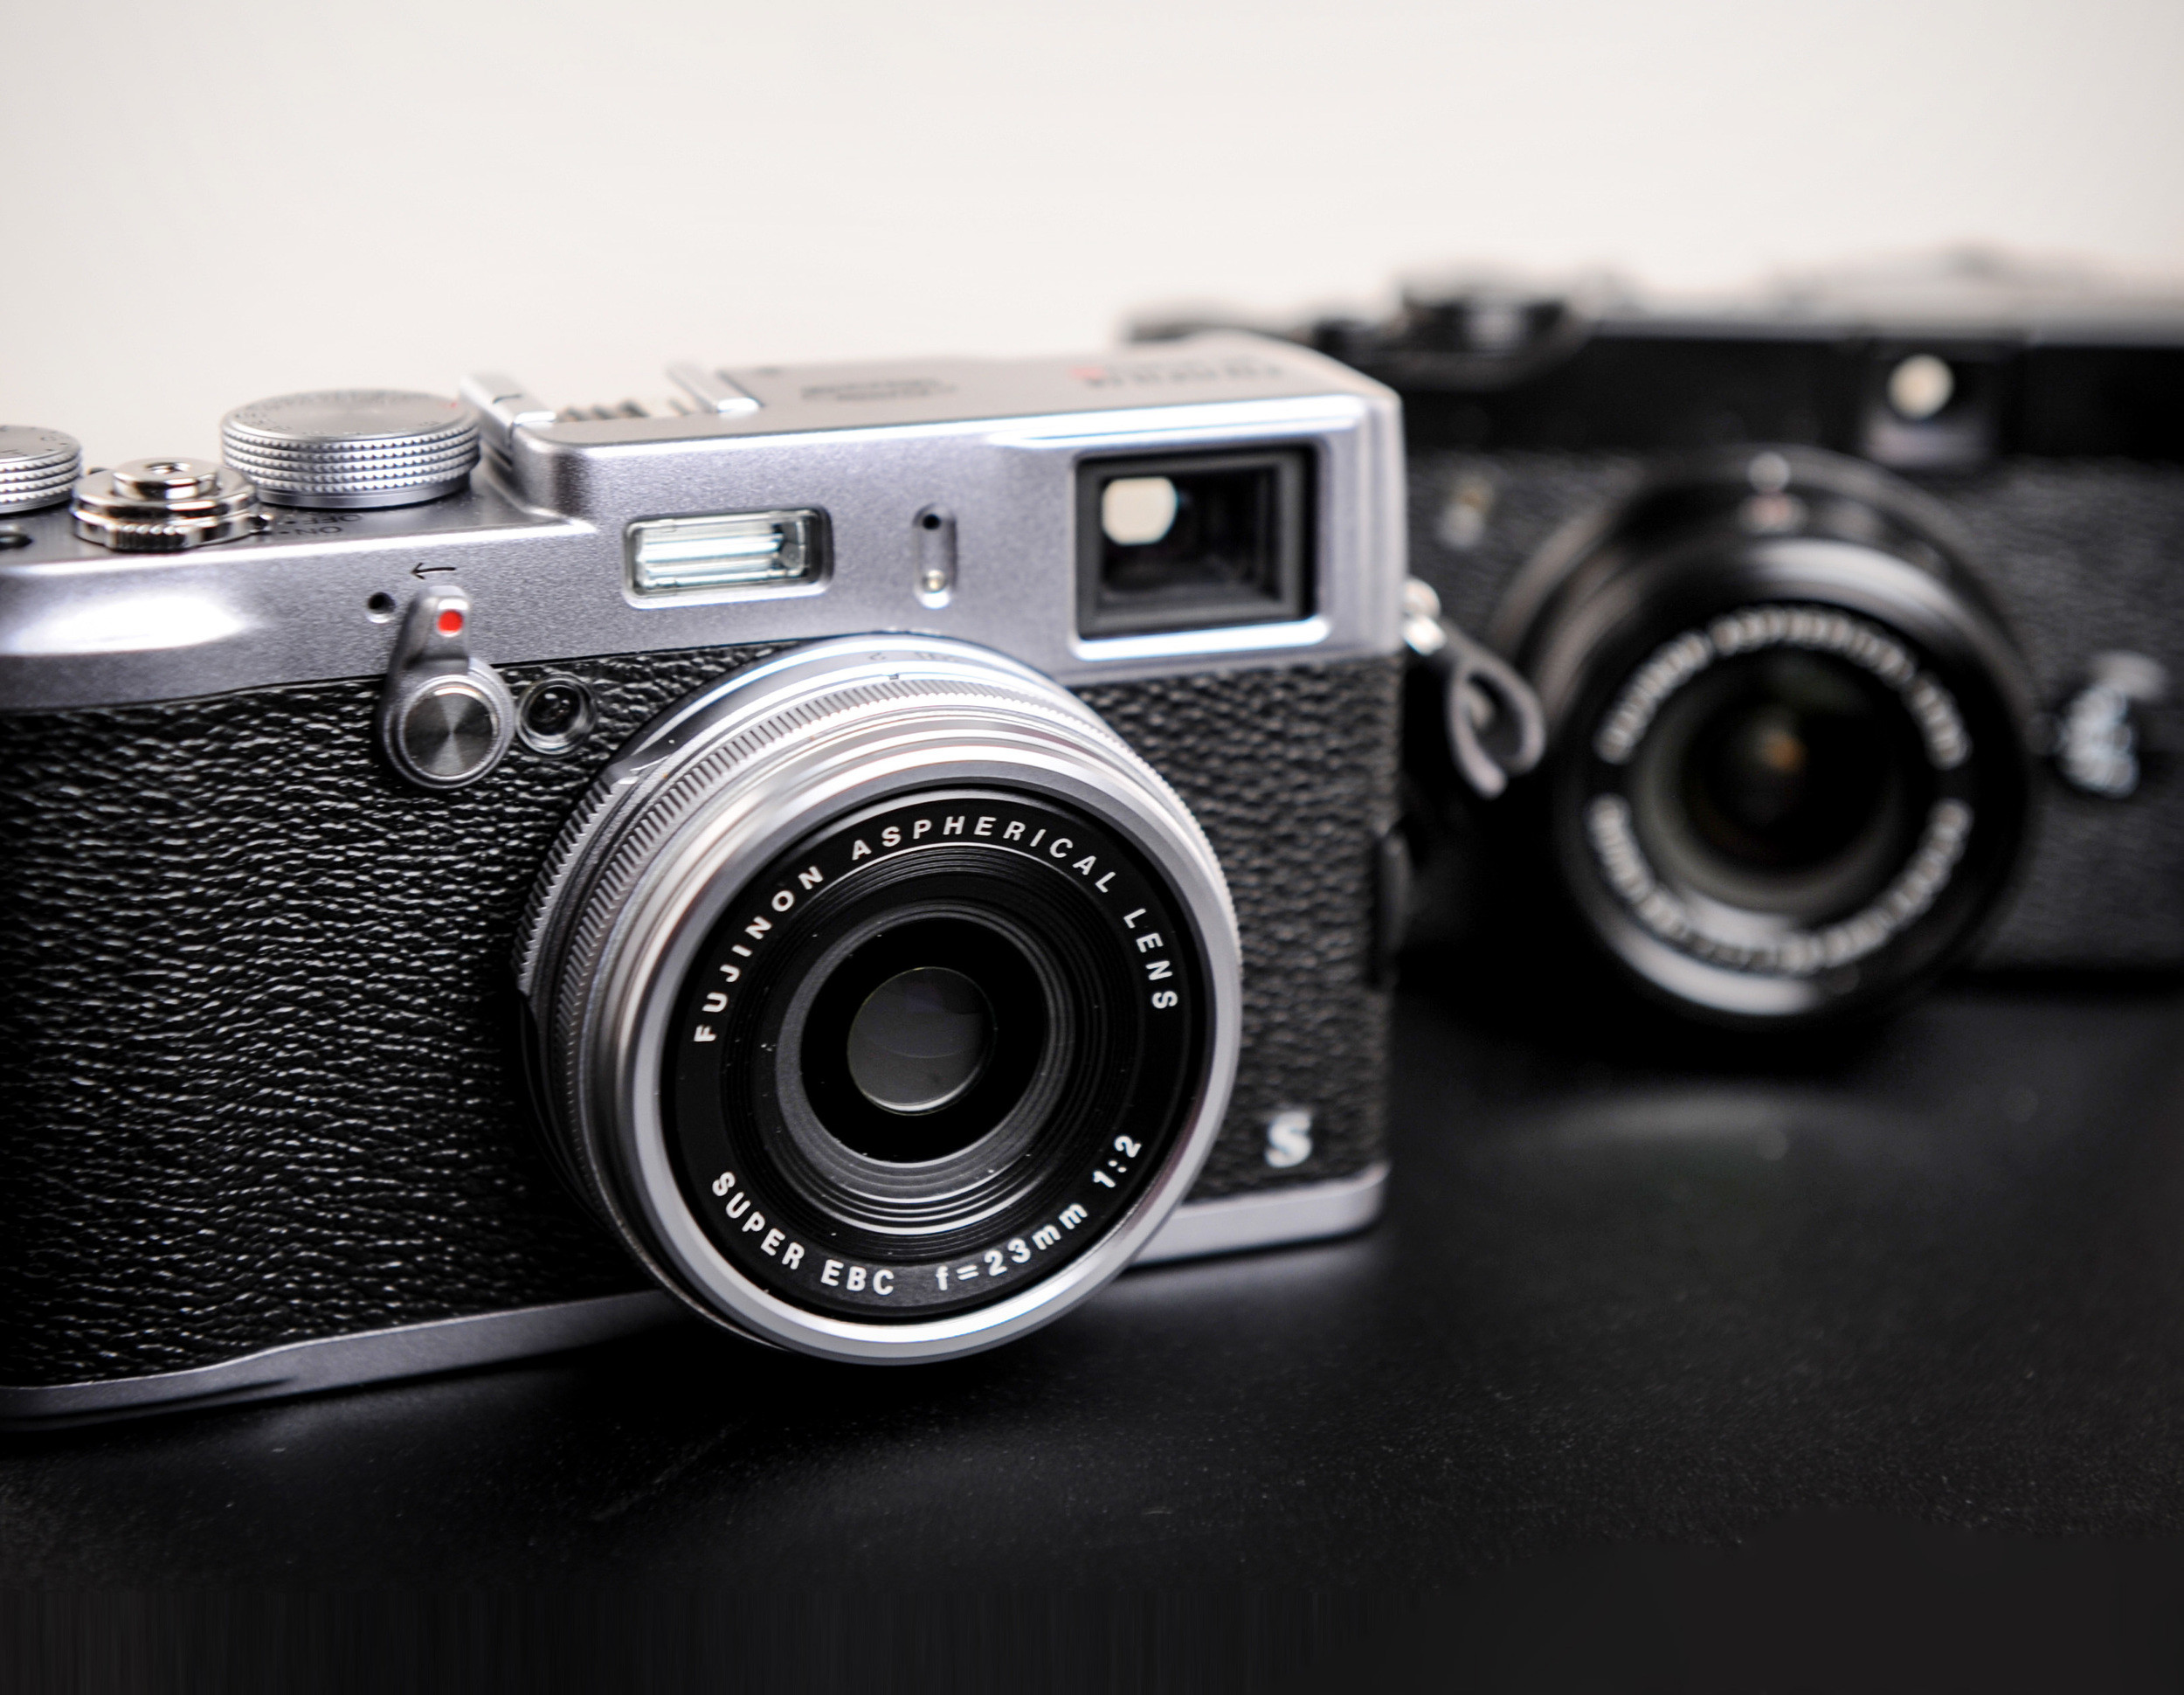 TIME FOR AN UPGRADE? FUJI X10 OR X100S — jfwPHOTO.com